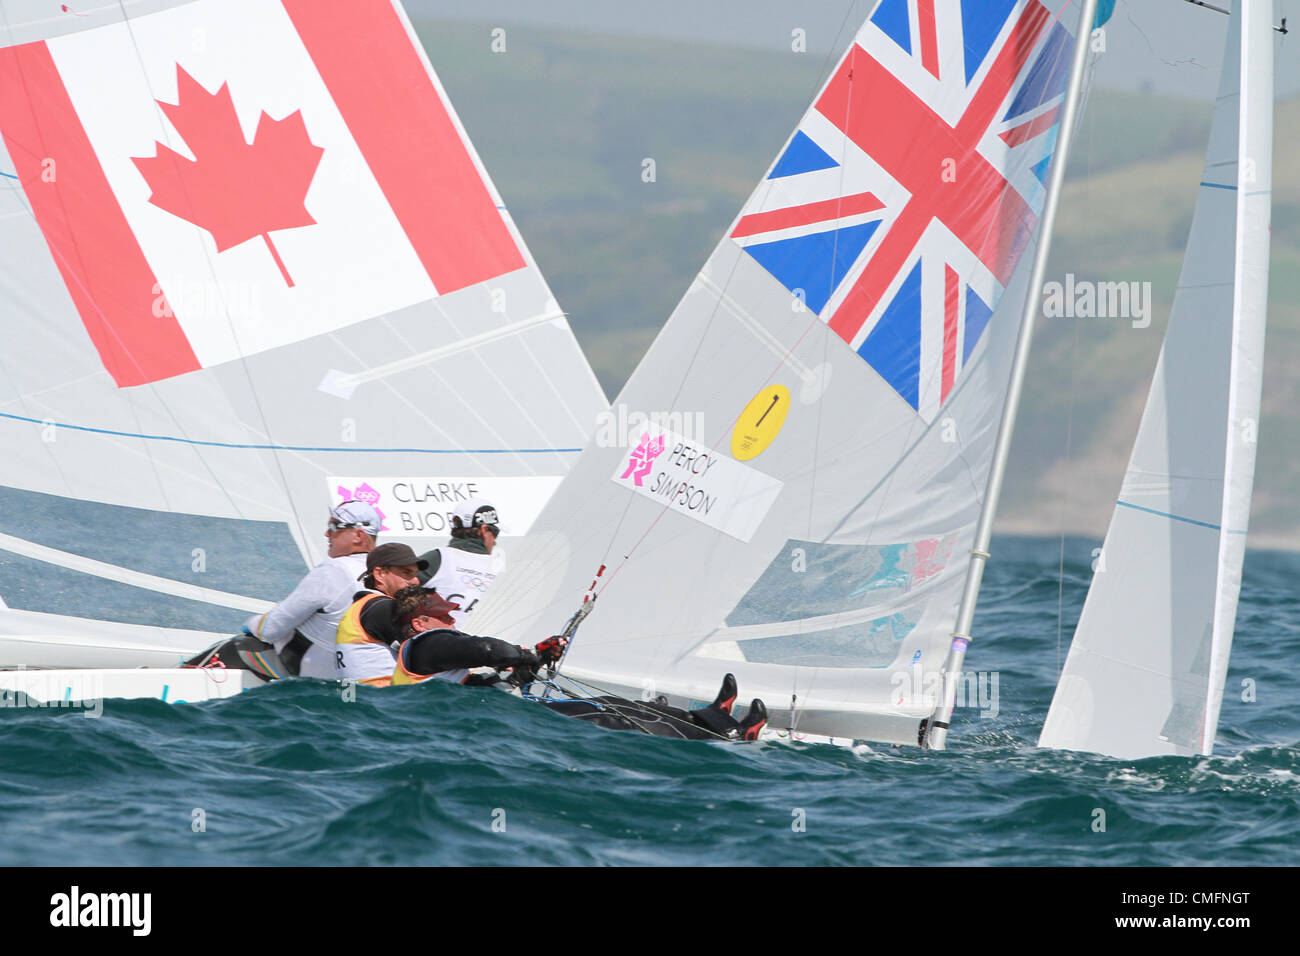 03.08.2012. Weymouth, England. Olympic Games Sailing at Weymouth, Dorset, August 2012. Olympic gold medalists (2008 Games) Iain Percy and Andrew Simpson for Team GB come close to a collission with Canada boat in the Star class out on Weymouth bay. Stock Photo